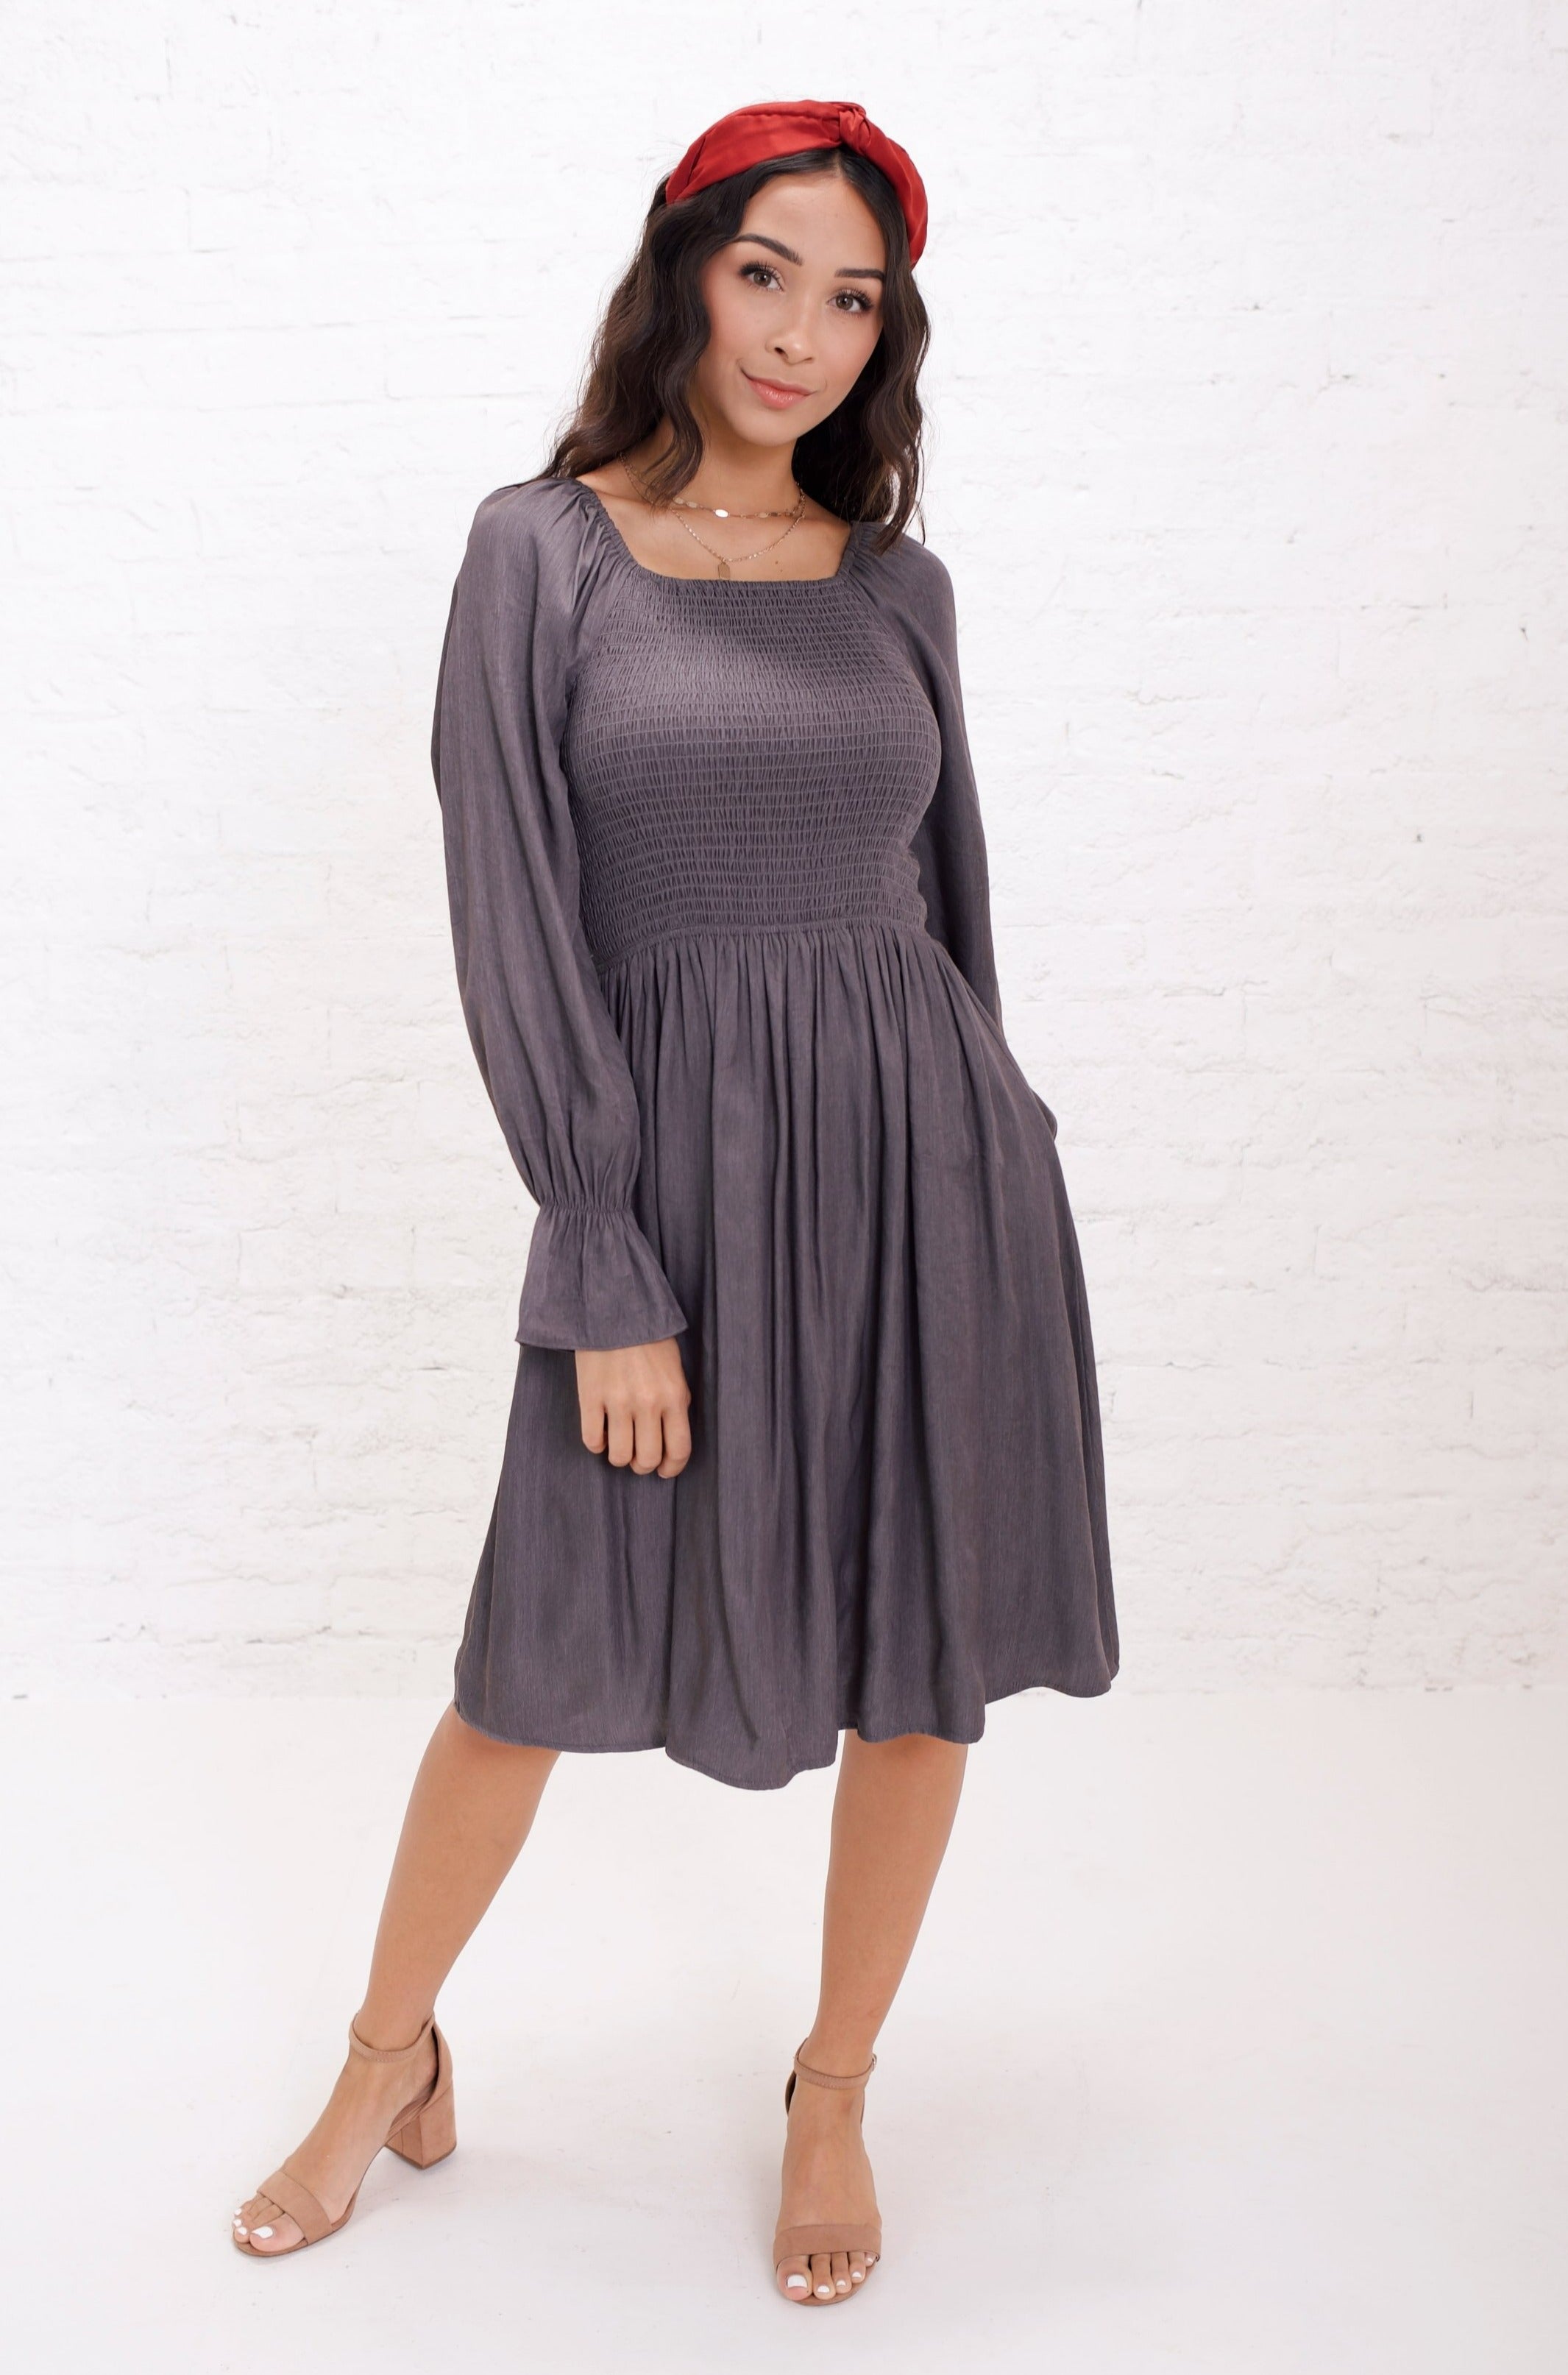 Size Large) Juliet Dress in Frosted Charcoal - Final Sale – Tilden